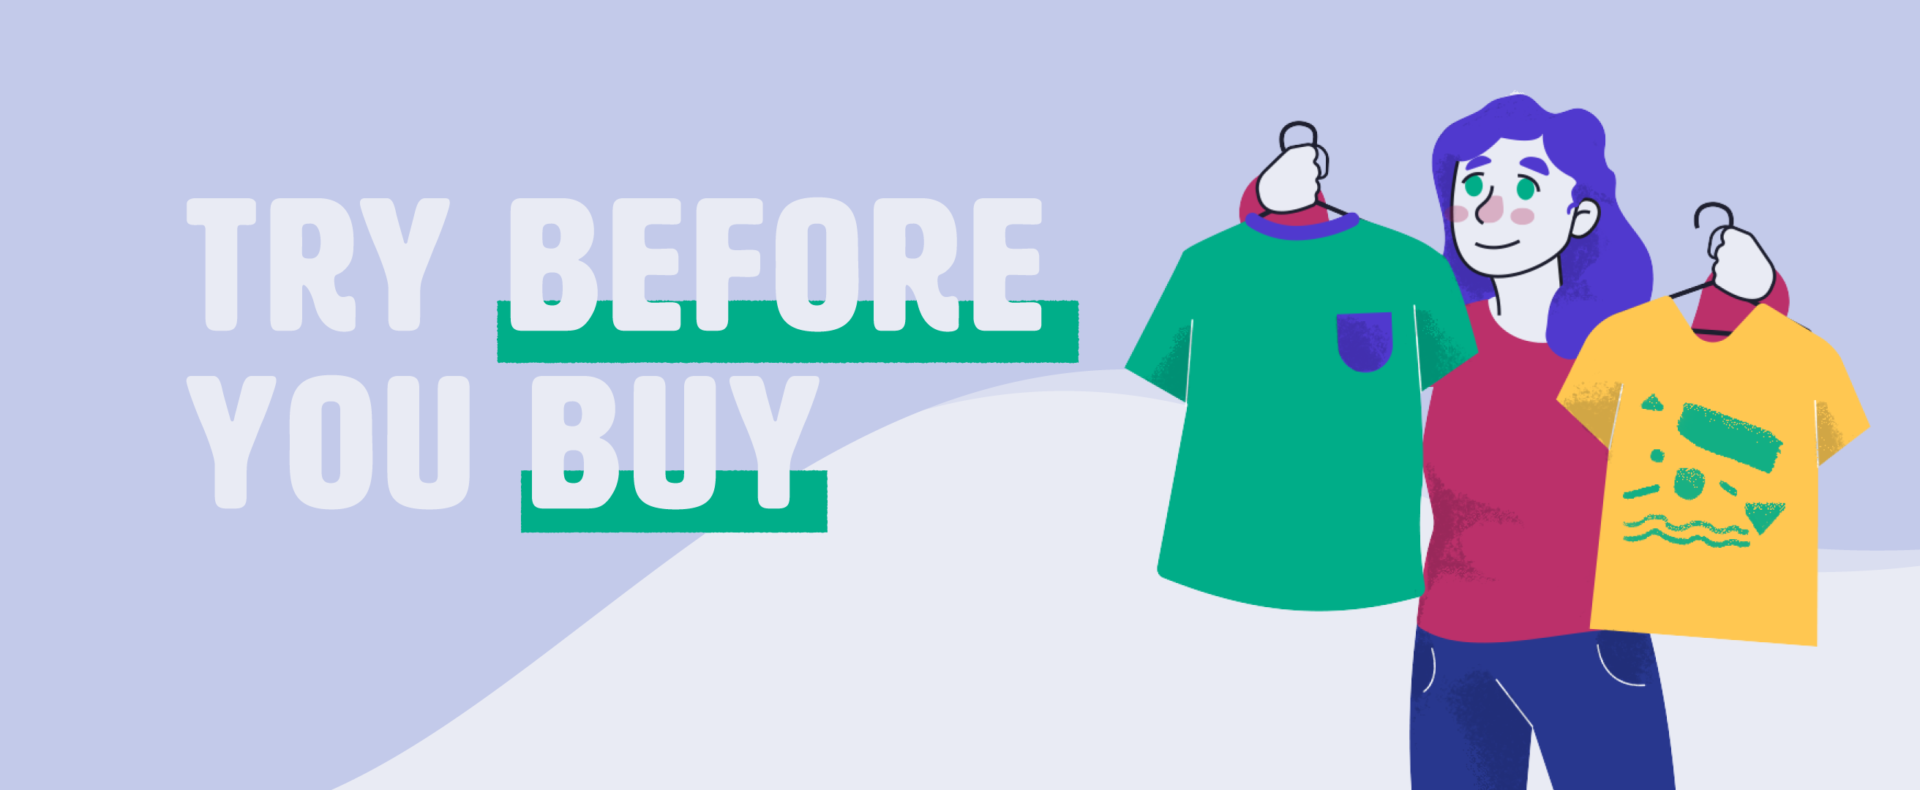 The Importance of ‘Try Before You Buy’: Samples for Small Business Tips | MediaOne Marketing Singapore